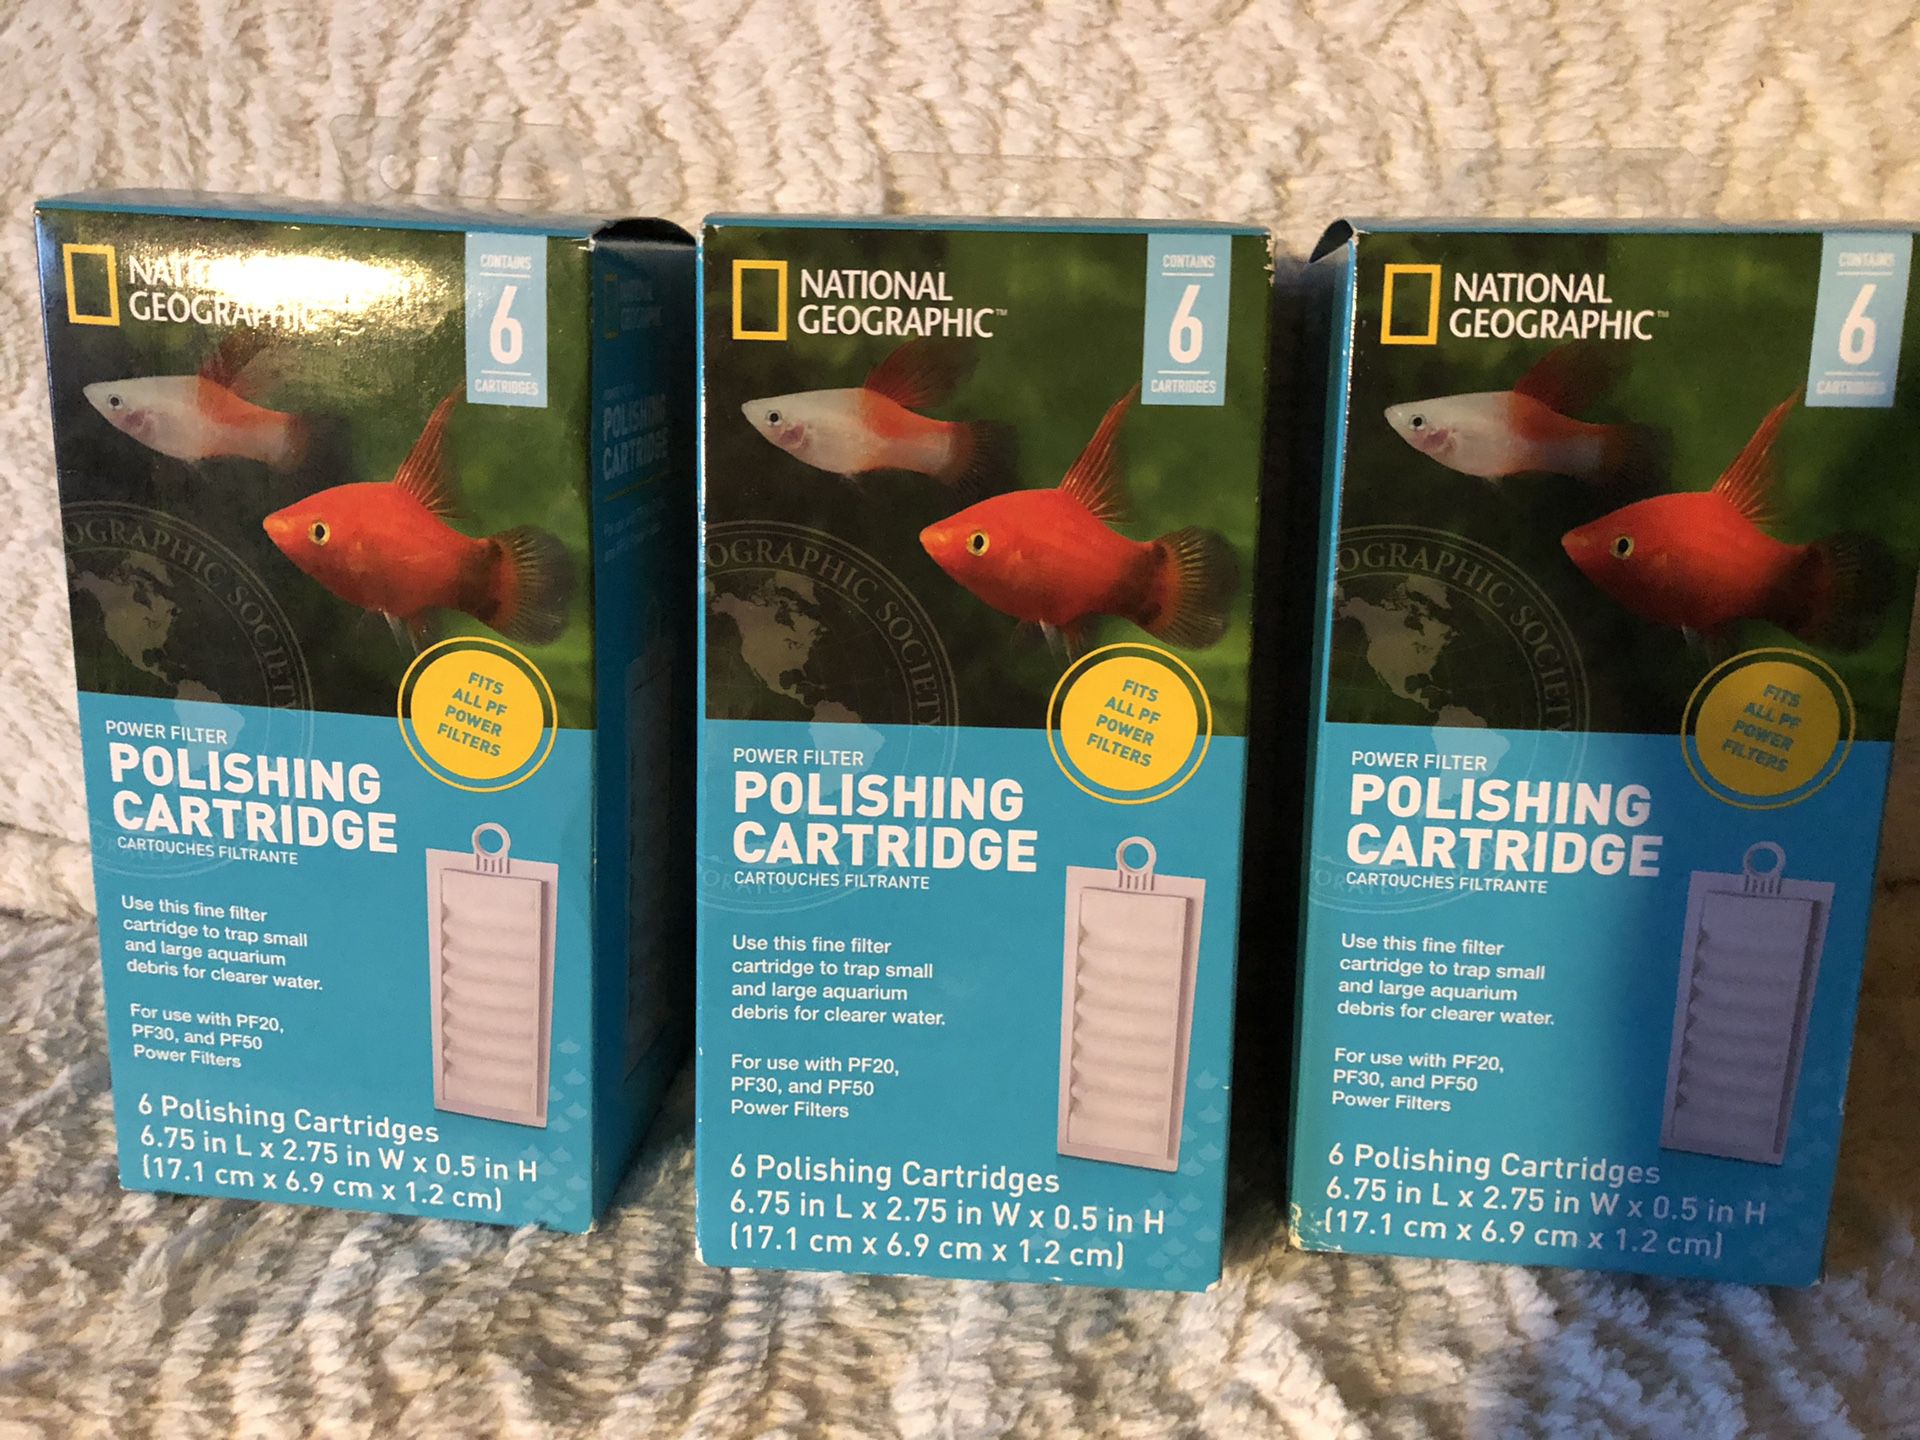 National Geographic power filter polishing cartridge. Brand new in boxes! Each box contains 6 Cartridges. Retails $21 a box, asking $10 each or all 3